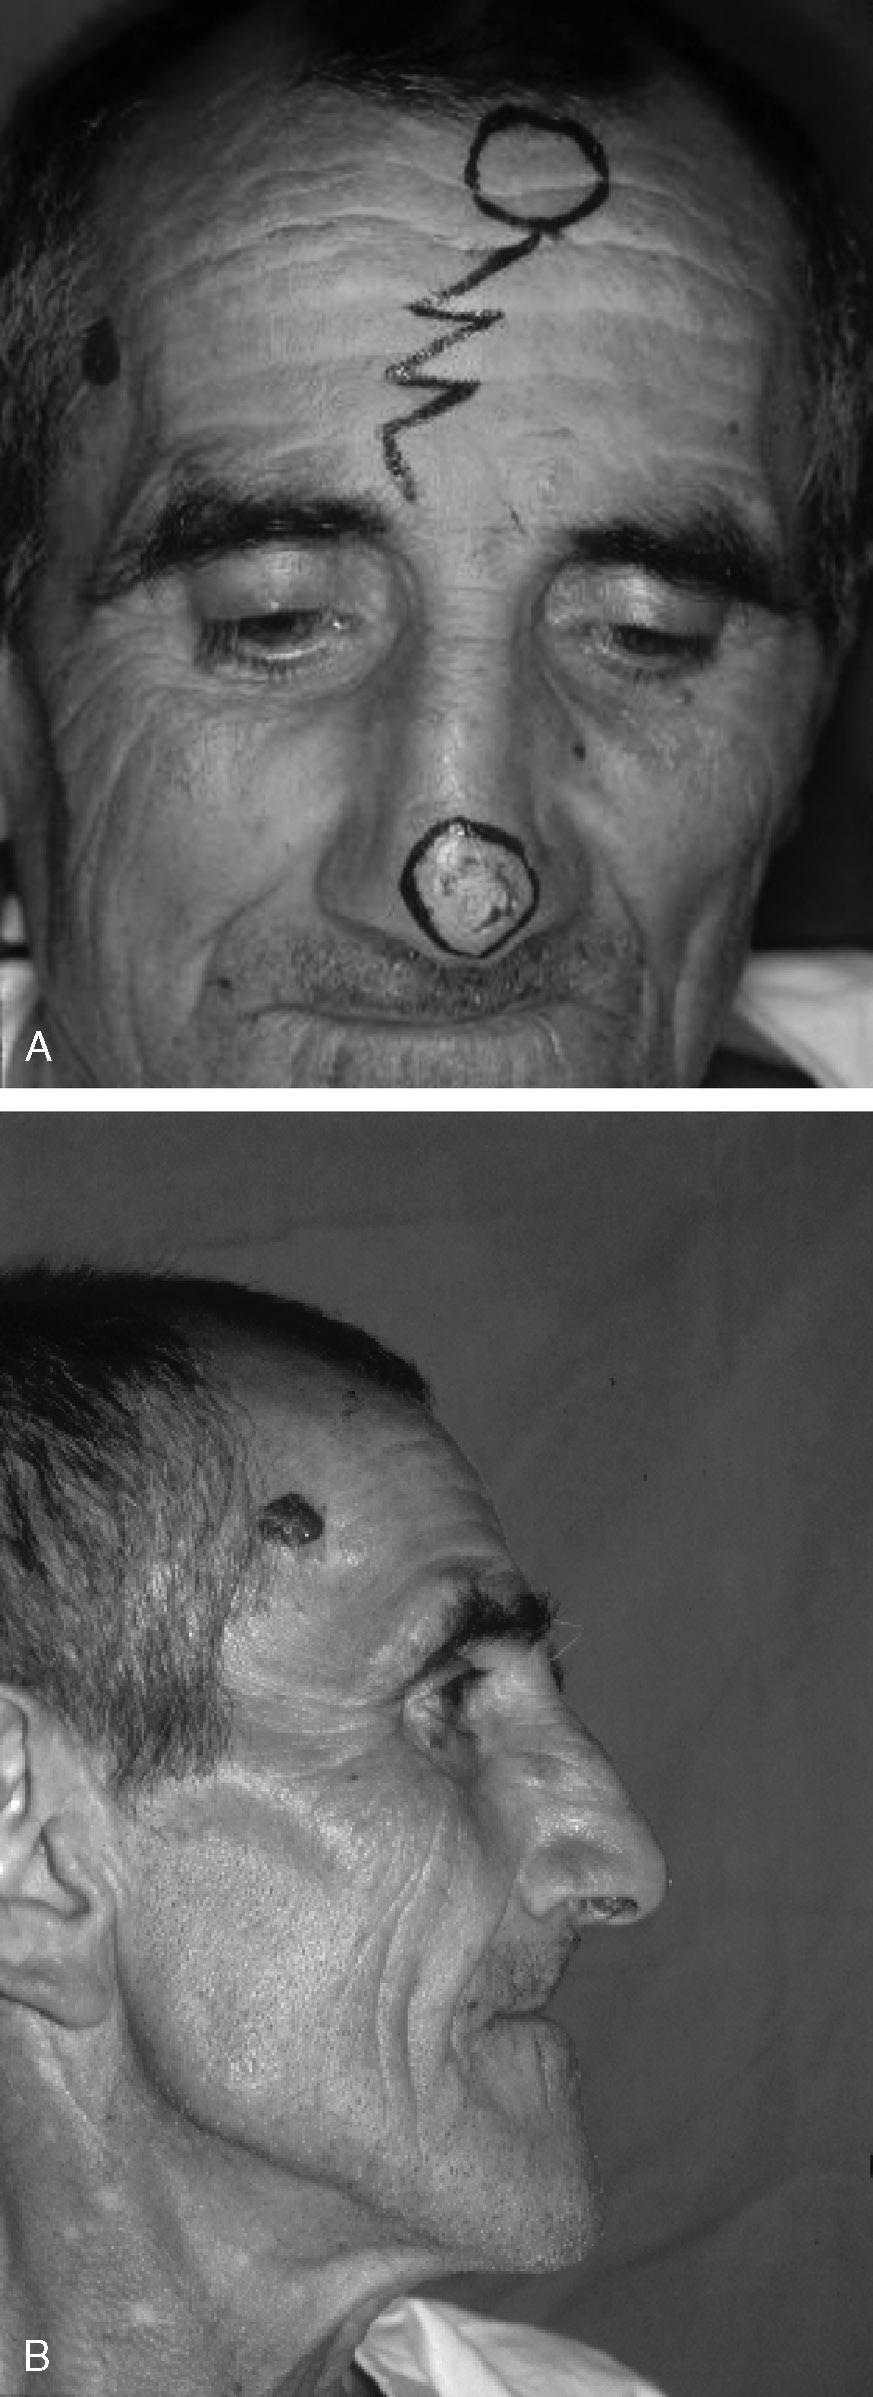 CLINICAL REPORT A61-year-old patient came to our attention with basal cell epithelioma of the nasal tip.